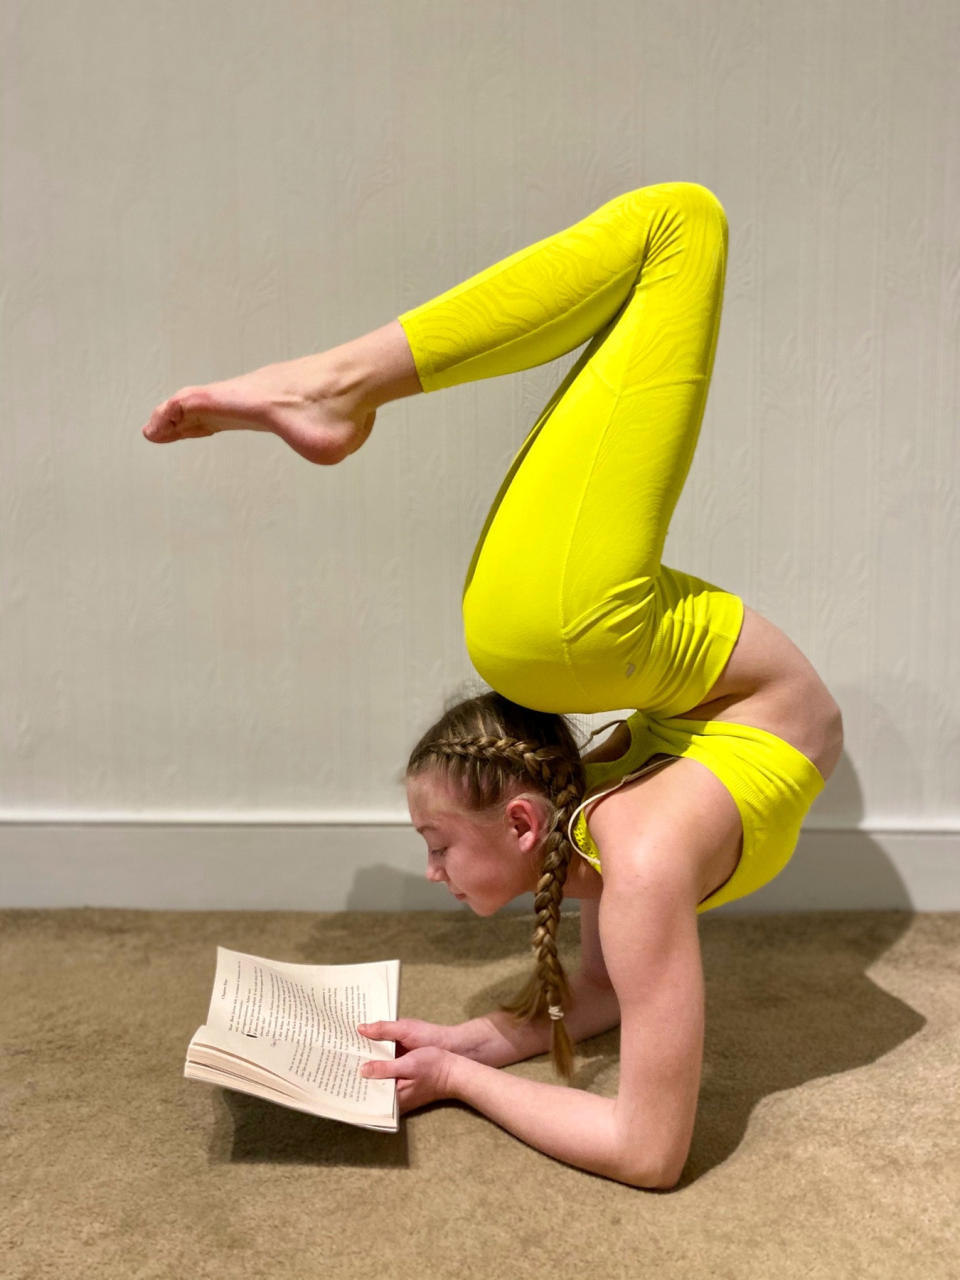 <p>Meet one of the UK's bendiest kids who has a unique take on flexible working - and types with her legs bent over her head. Contortionist Roxy Kobyliukh, 13, is happy to do her homework on a lap-top in a 'triple fold position'. She is comfortable with her entire body bent backwards so her head appears in between her legs. The bendy teen has been a practicing contortionist ever since she discovered she was more flexible than most kids during gymnastics club, aged five. Now training 15 hours a week, Roxy can contort her slender frame into incredibly difficult positions with ease.</p>
